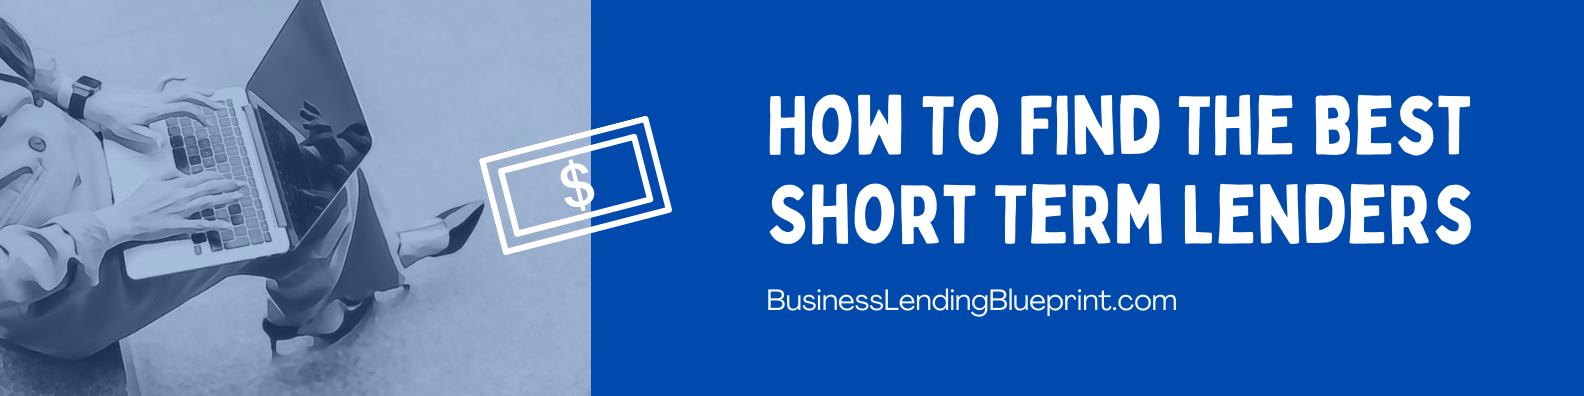 How To Find The Best Short Term Lenders graphic